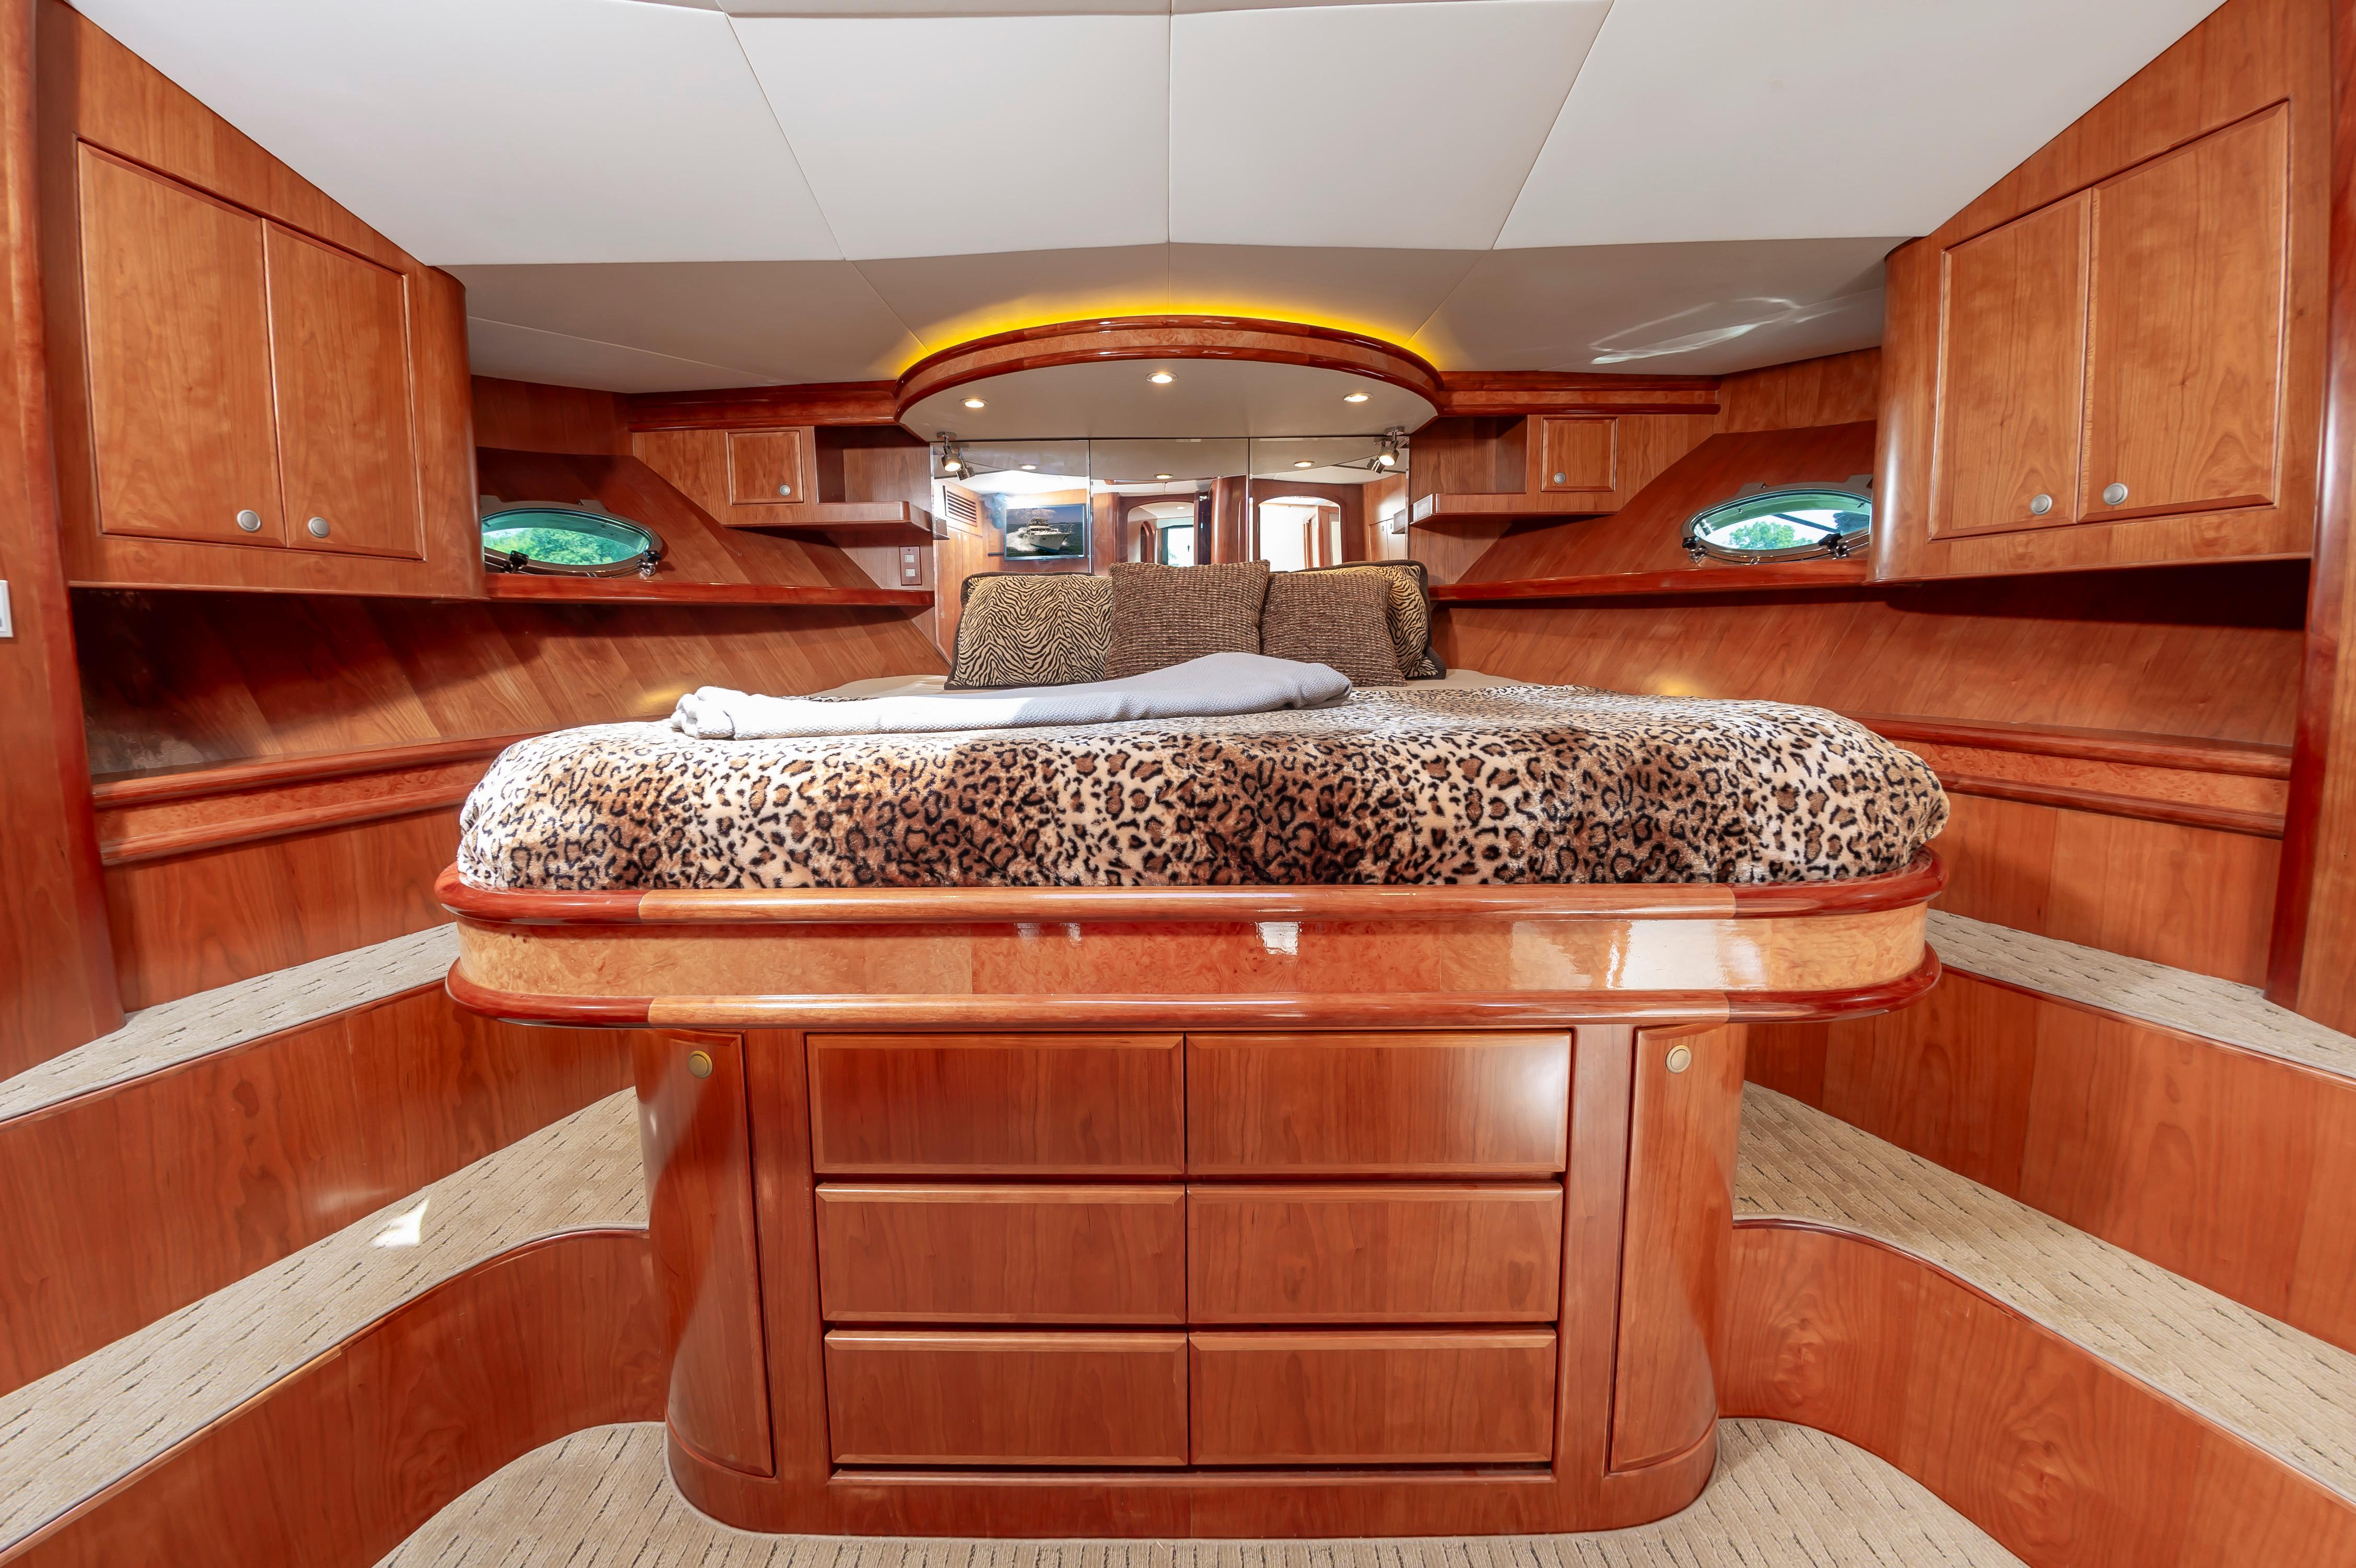 2016 Mikelson 50' S/F, Master Stateroom picture 2